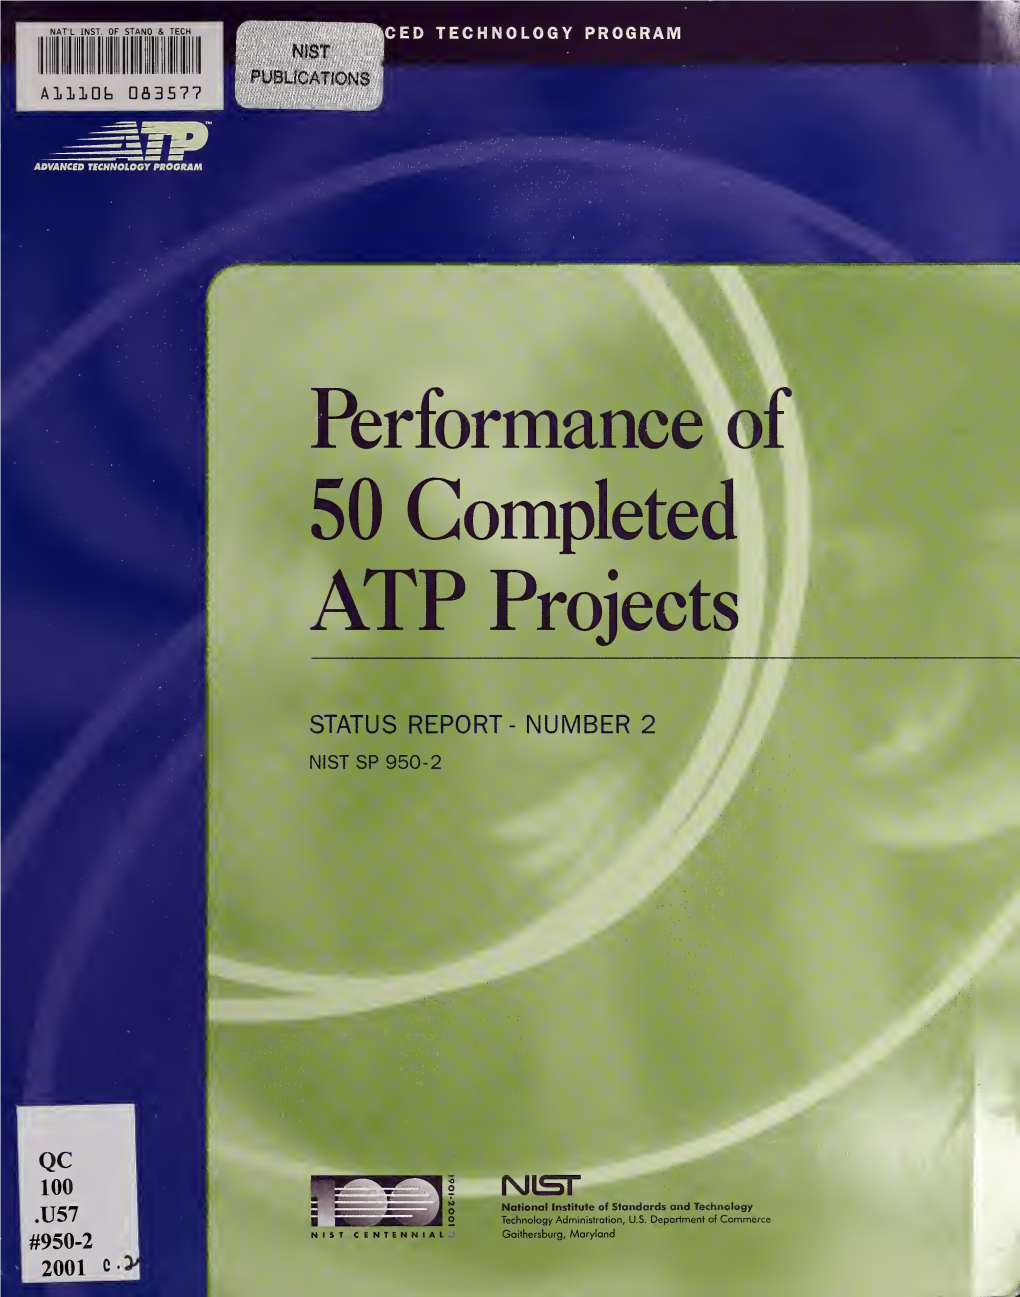 Performance of 50 Completed ATP Projects, Status Report Number 2